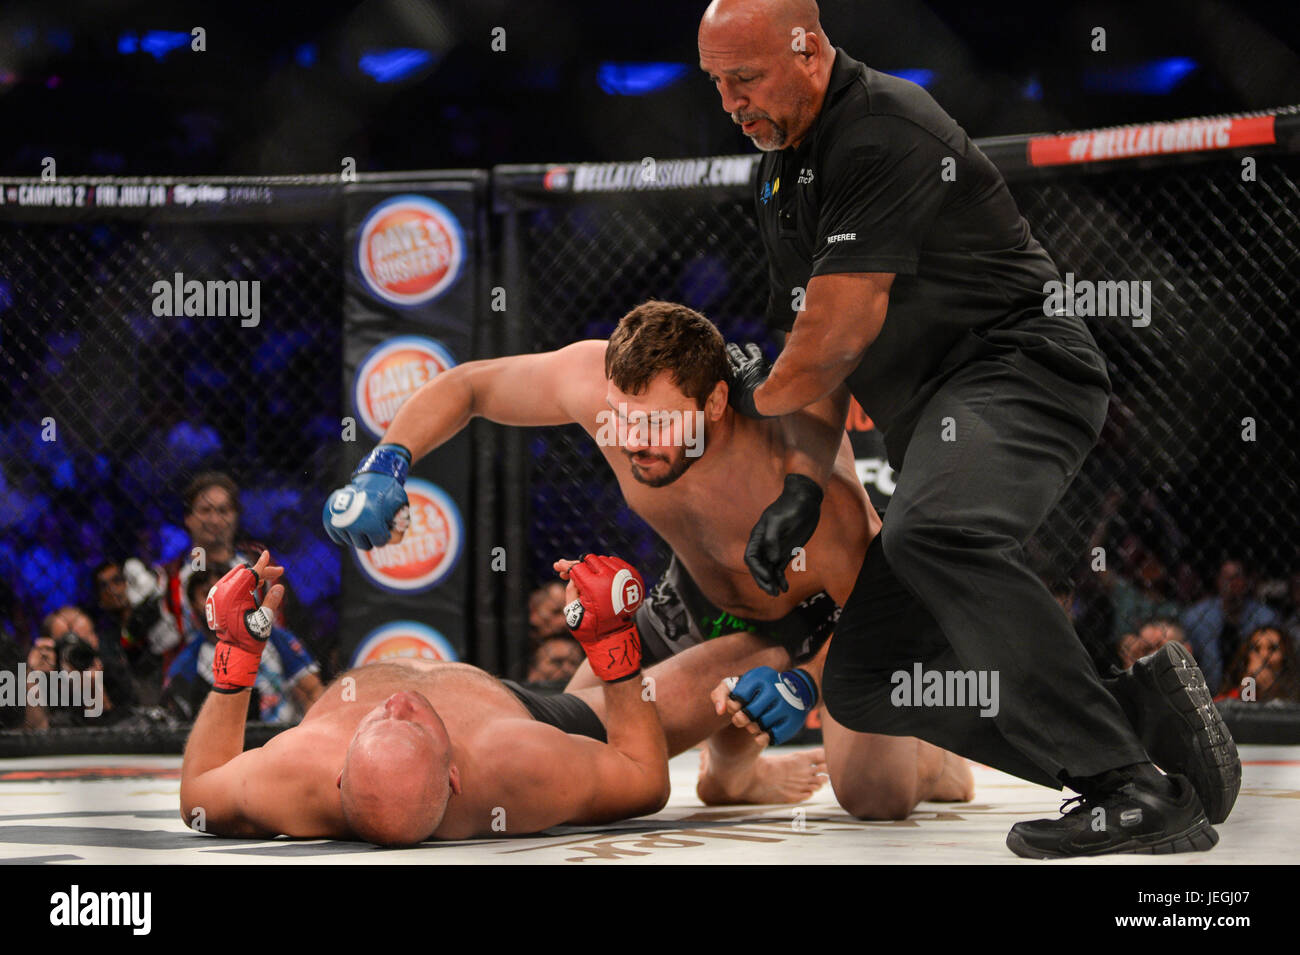 New York, NY, USA. 24th June, 2017. Heavyweight MATT MITRIONE punches FEDOR EMELIANENKO during the the co-headlining fight held at Madison Square Garden in New York. Credit: Amy Sanderson/ZUMA Wire/Alamy Live News Stock Photo